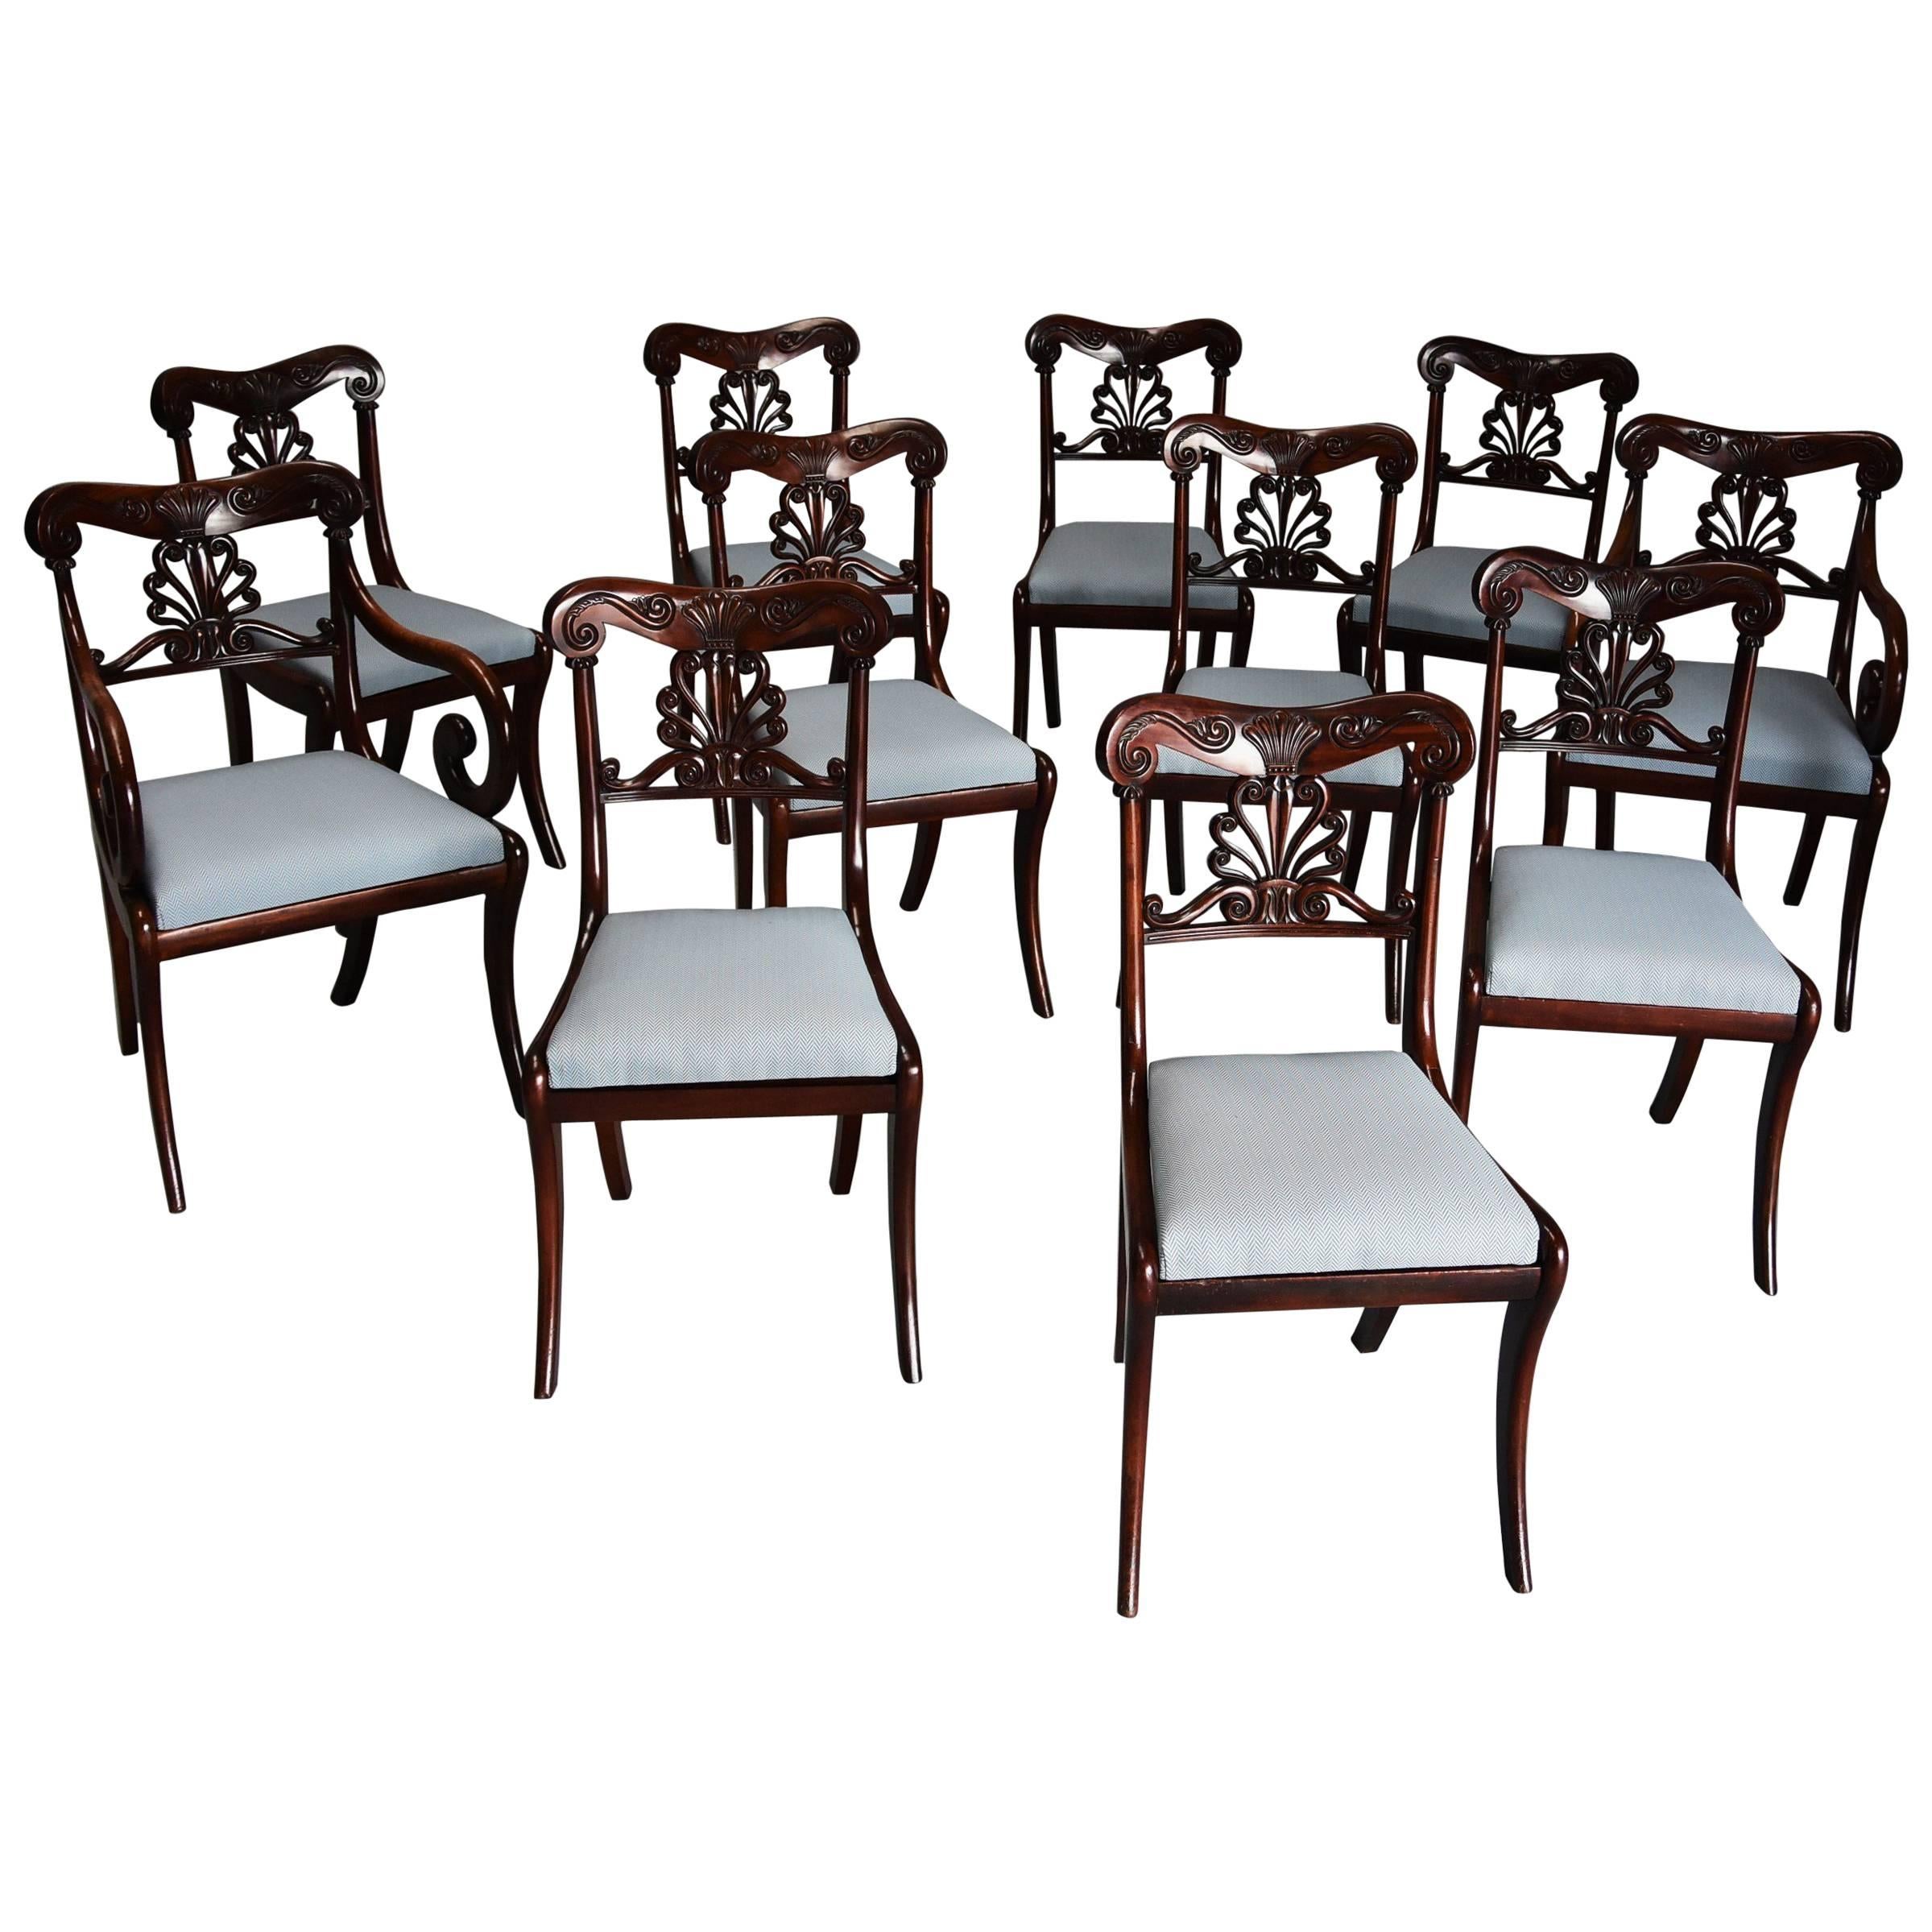 Exceptional Set of 12 Superb Quality Cuban Mahogany Regency Dining Chairs